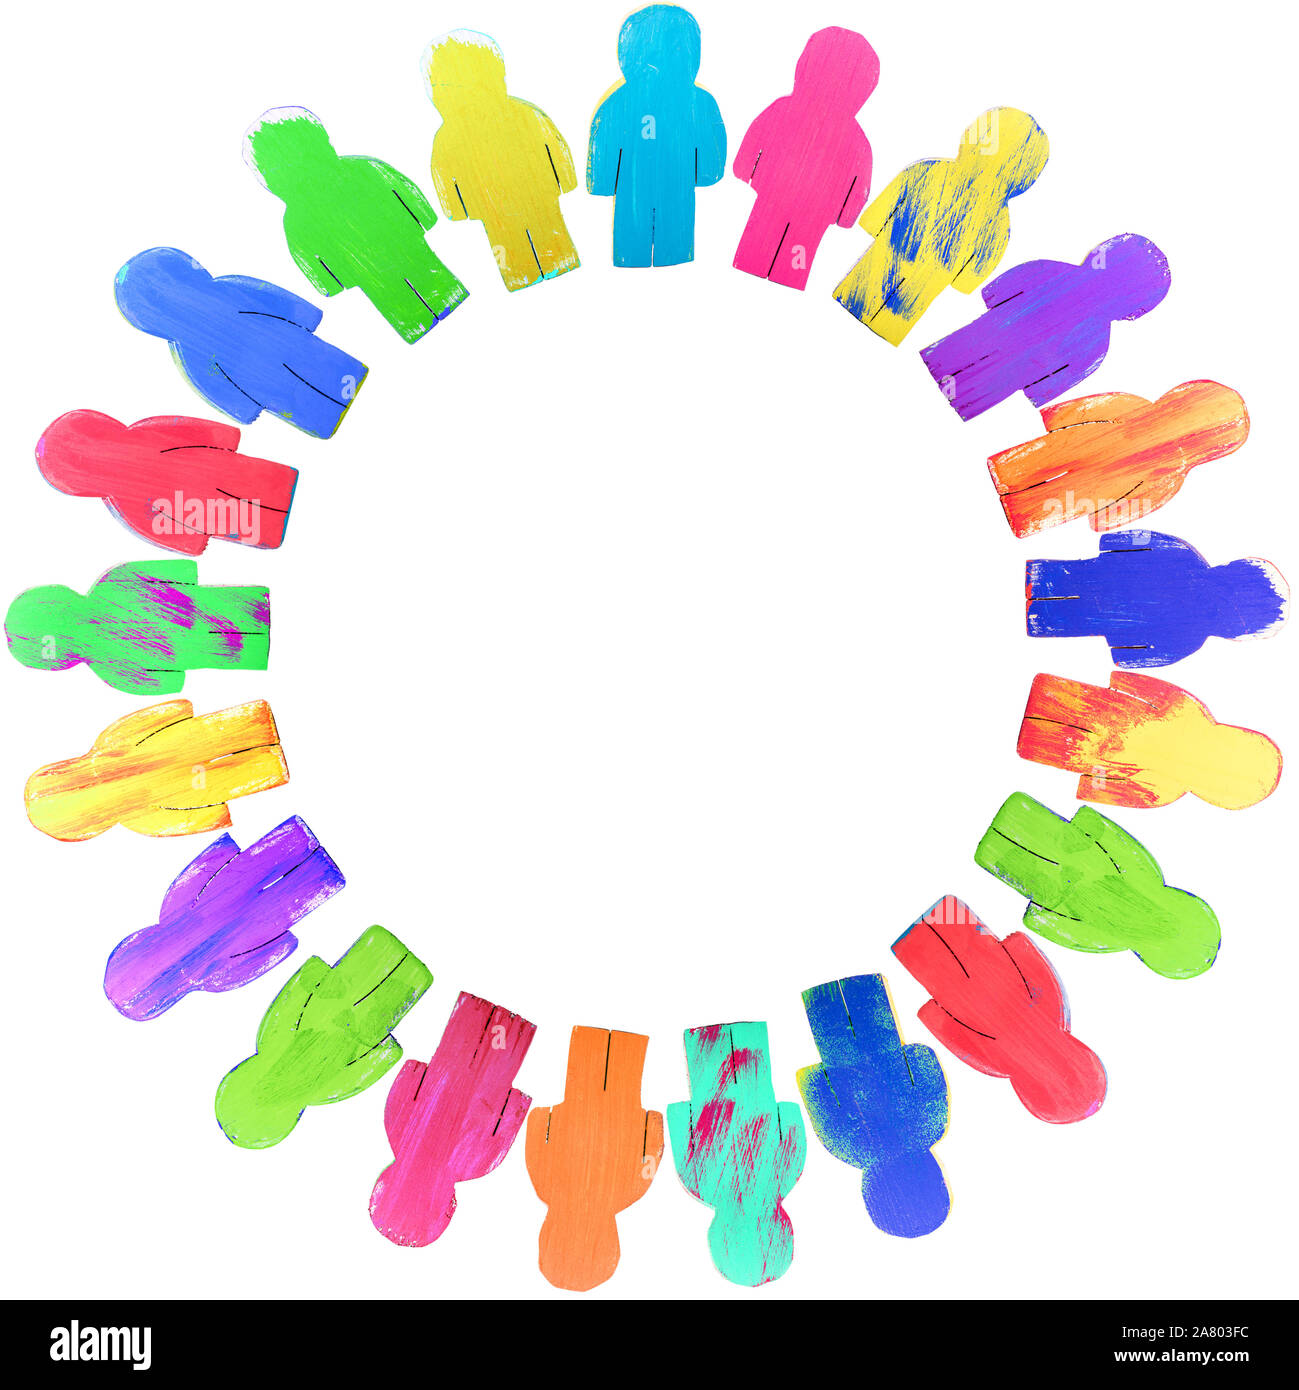 Diversity wooden figures in a circle, concept global connection and friendship, isolated Stock Photo